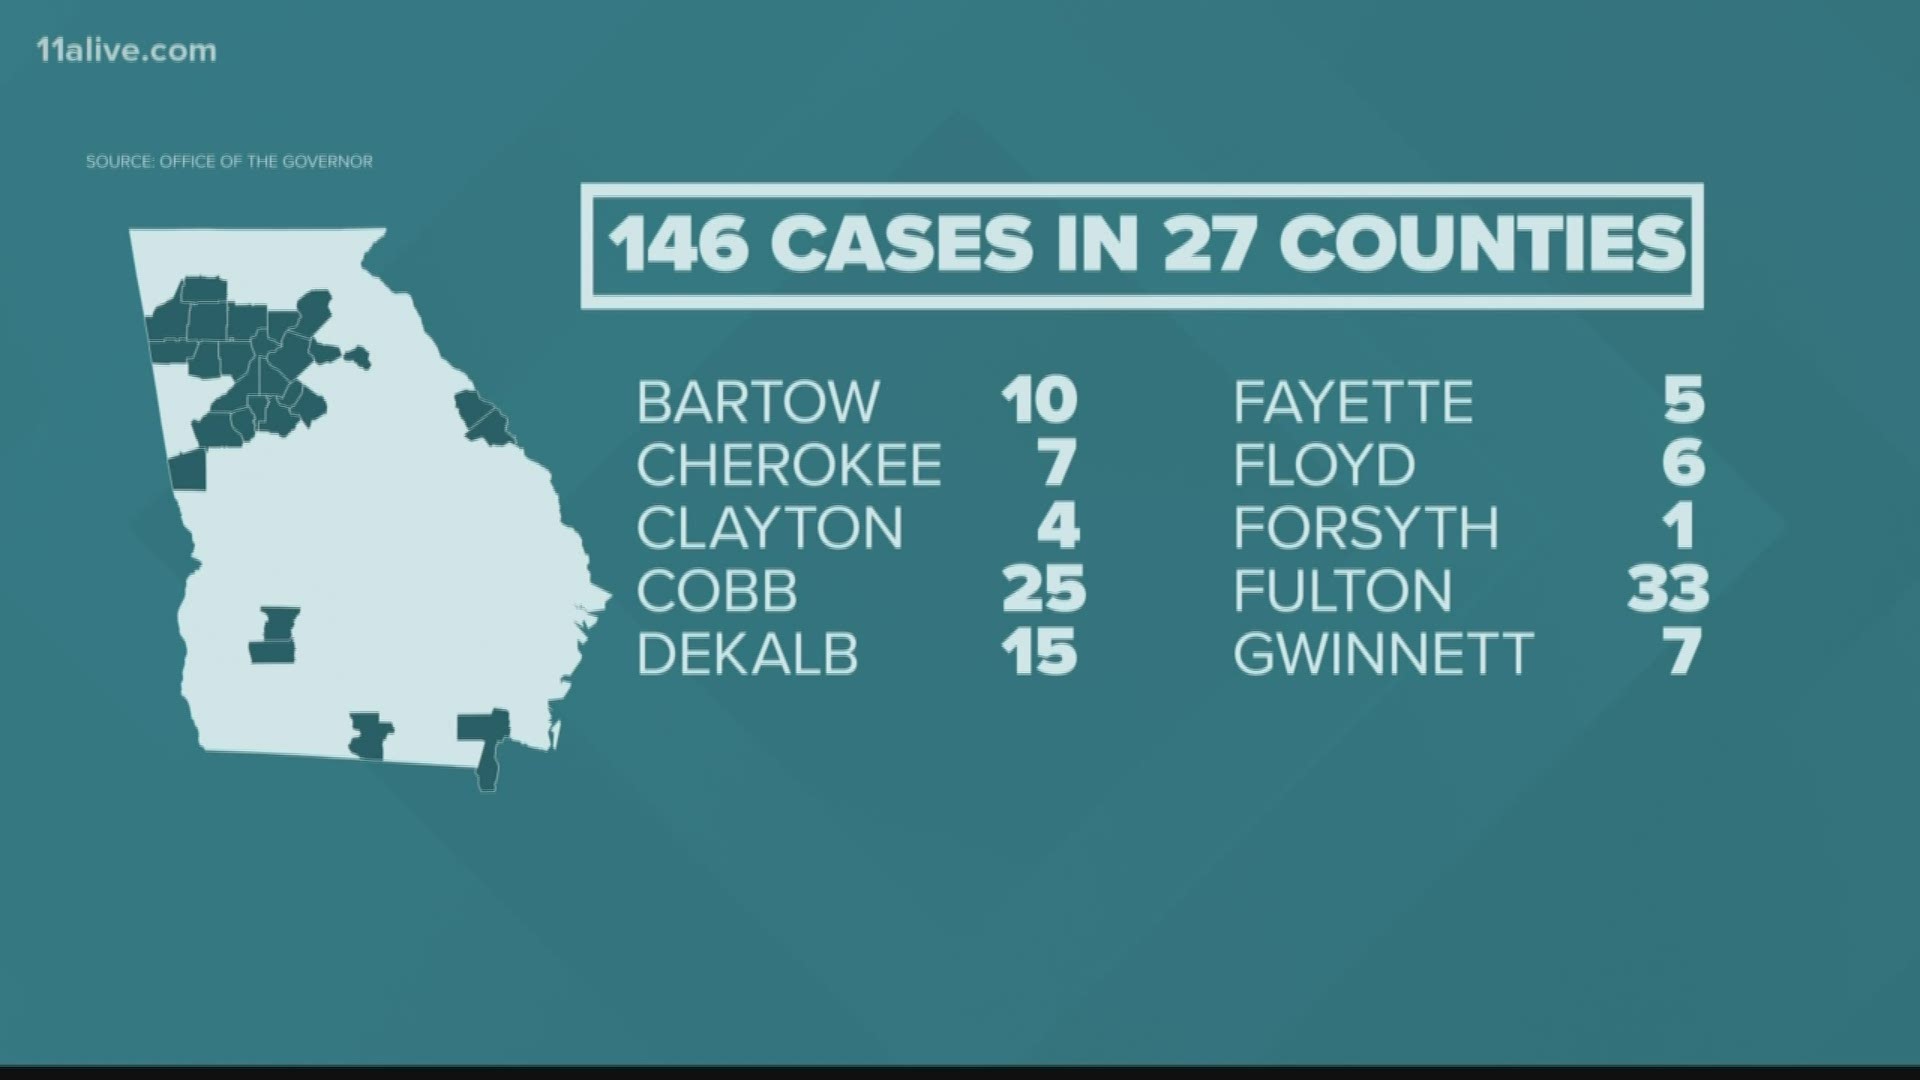 Here's a glance at the cases in the the state.